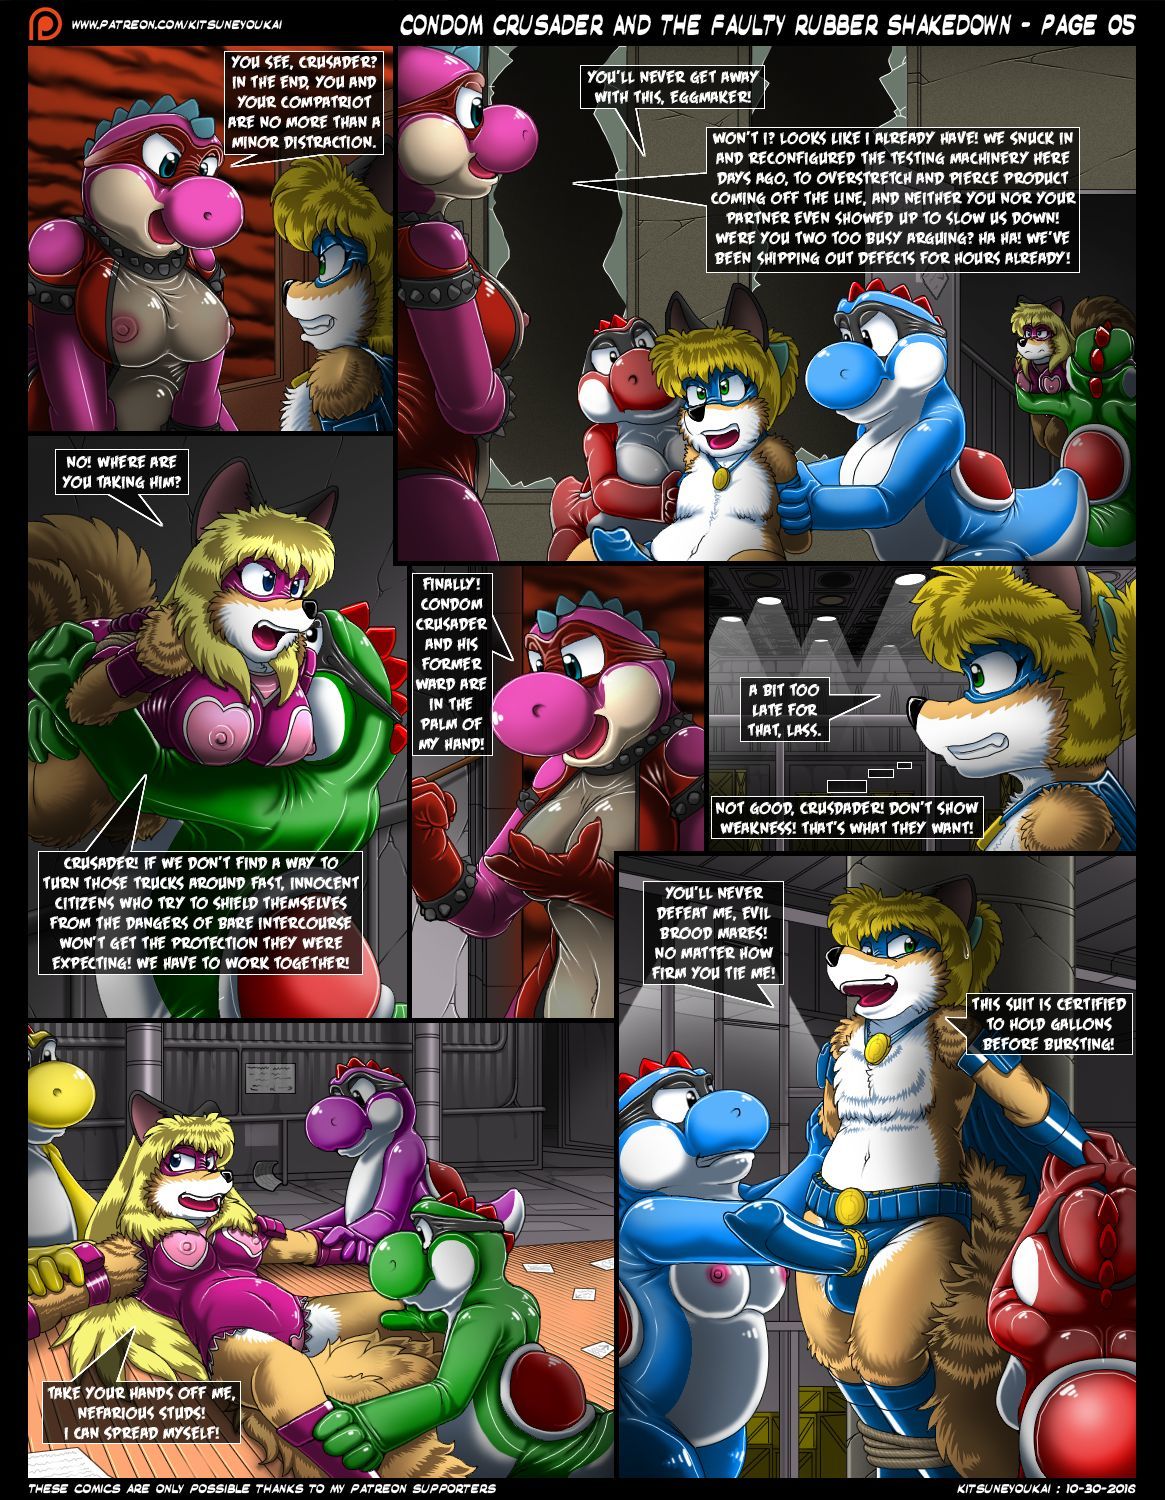 Condom Crusader And The Faulty Rubber Shakedown - Kitsune Youkai page 6